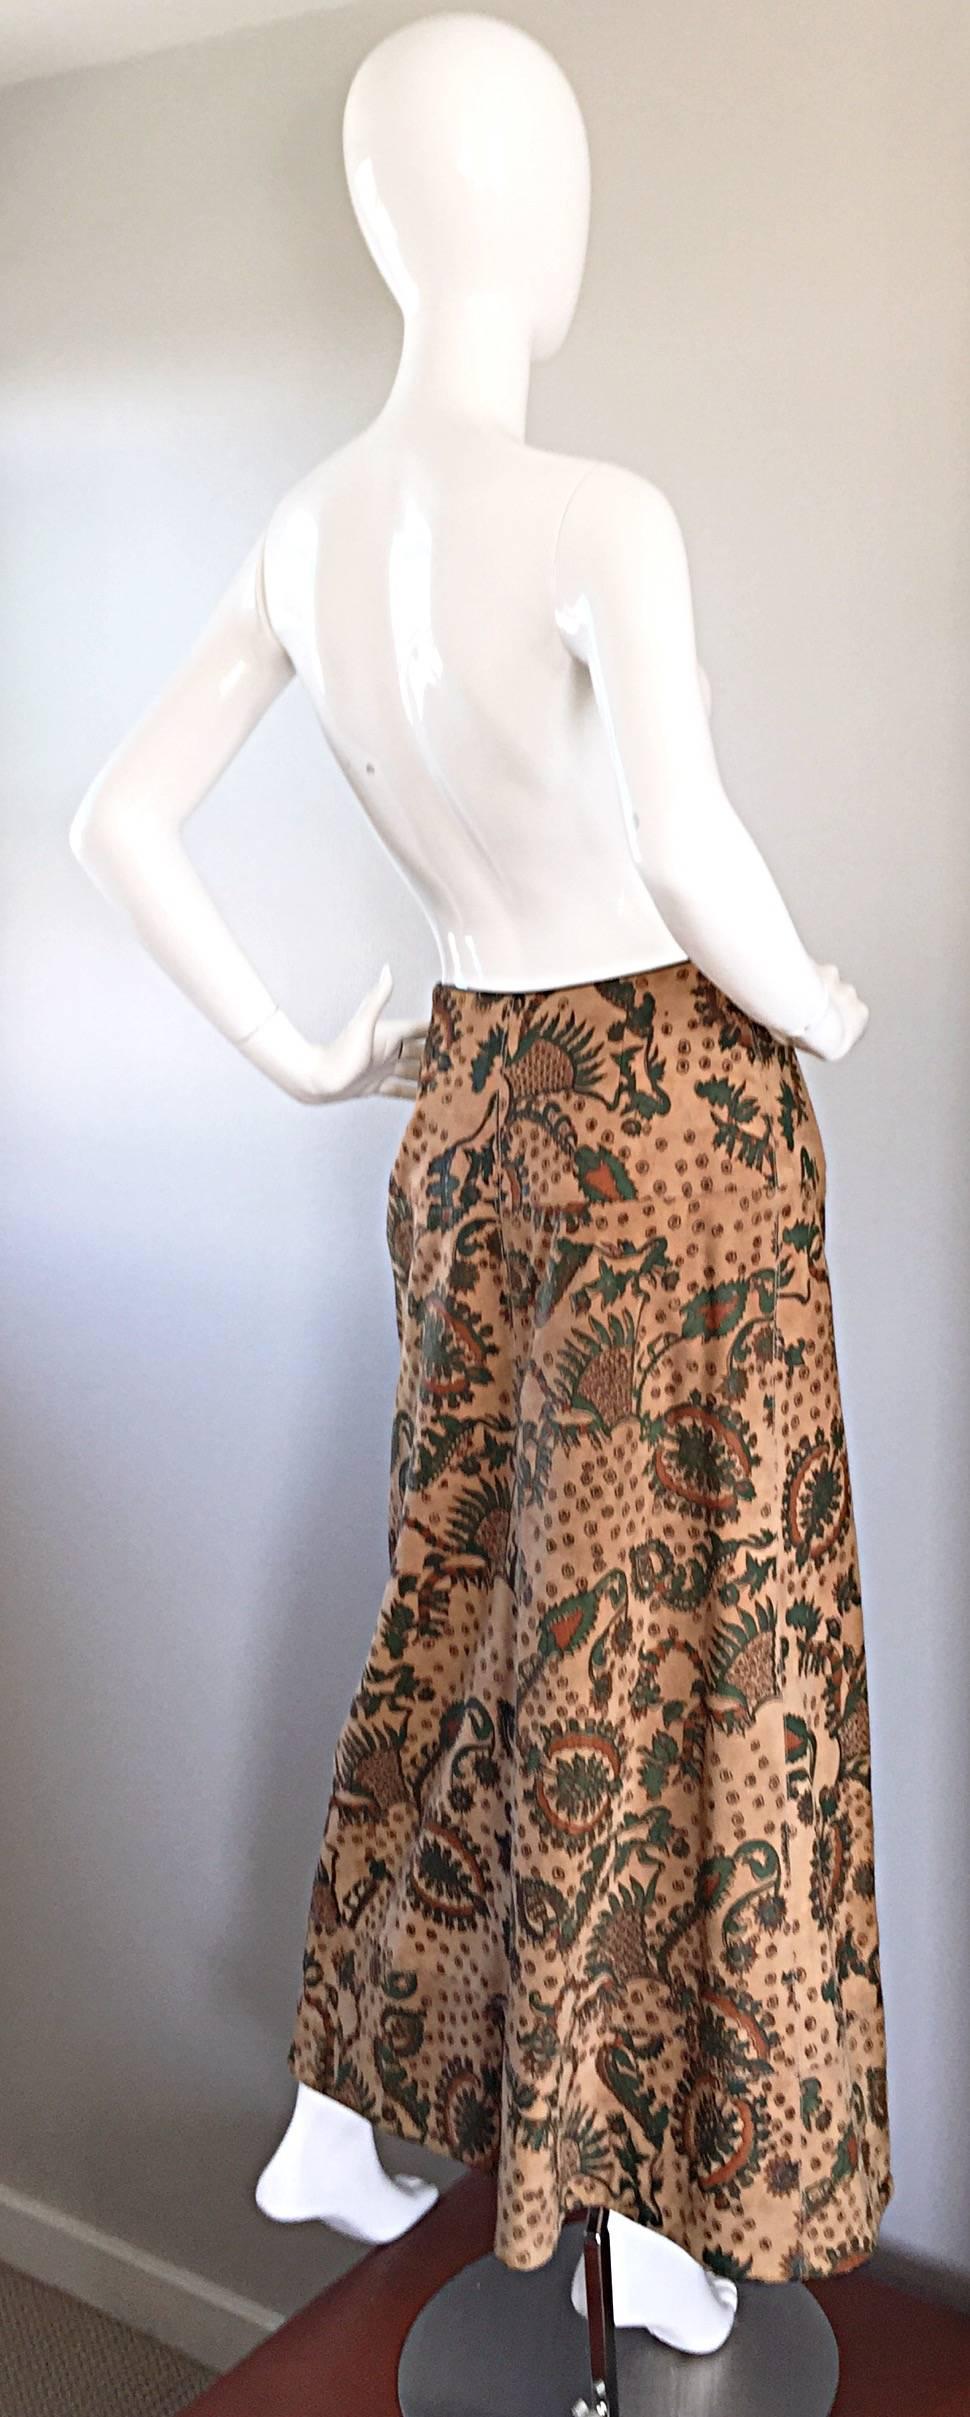 Exceptional and rare vintage Geoffrey Beene 'Bazaar' 1970s 70s suede leather maxi skirt! From Beene's first label, 